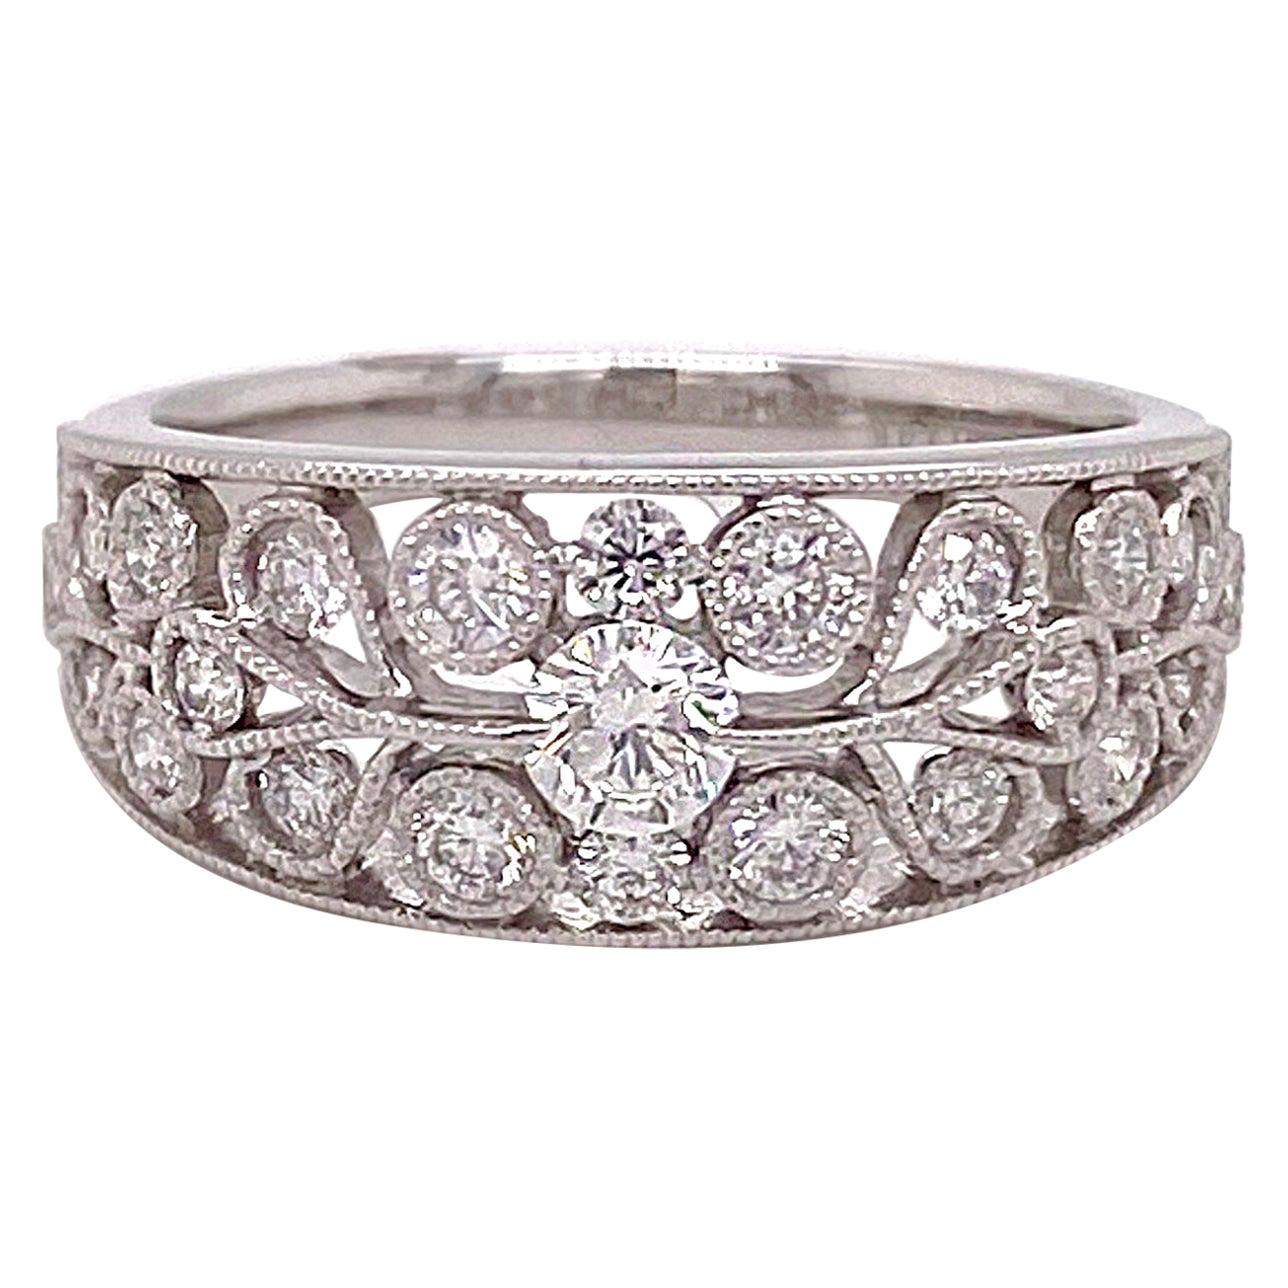 Tapered Wide Diamond Band, White Gold with 23 Diamonds .59 Carat Low Profile